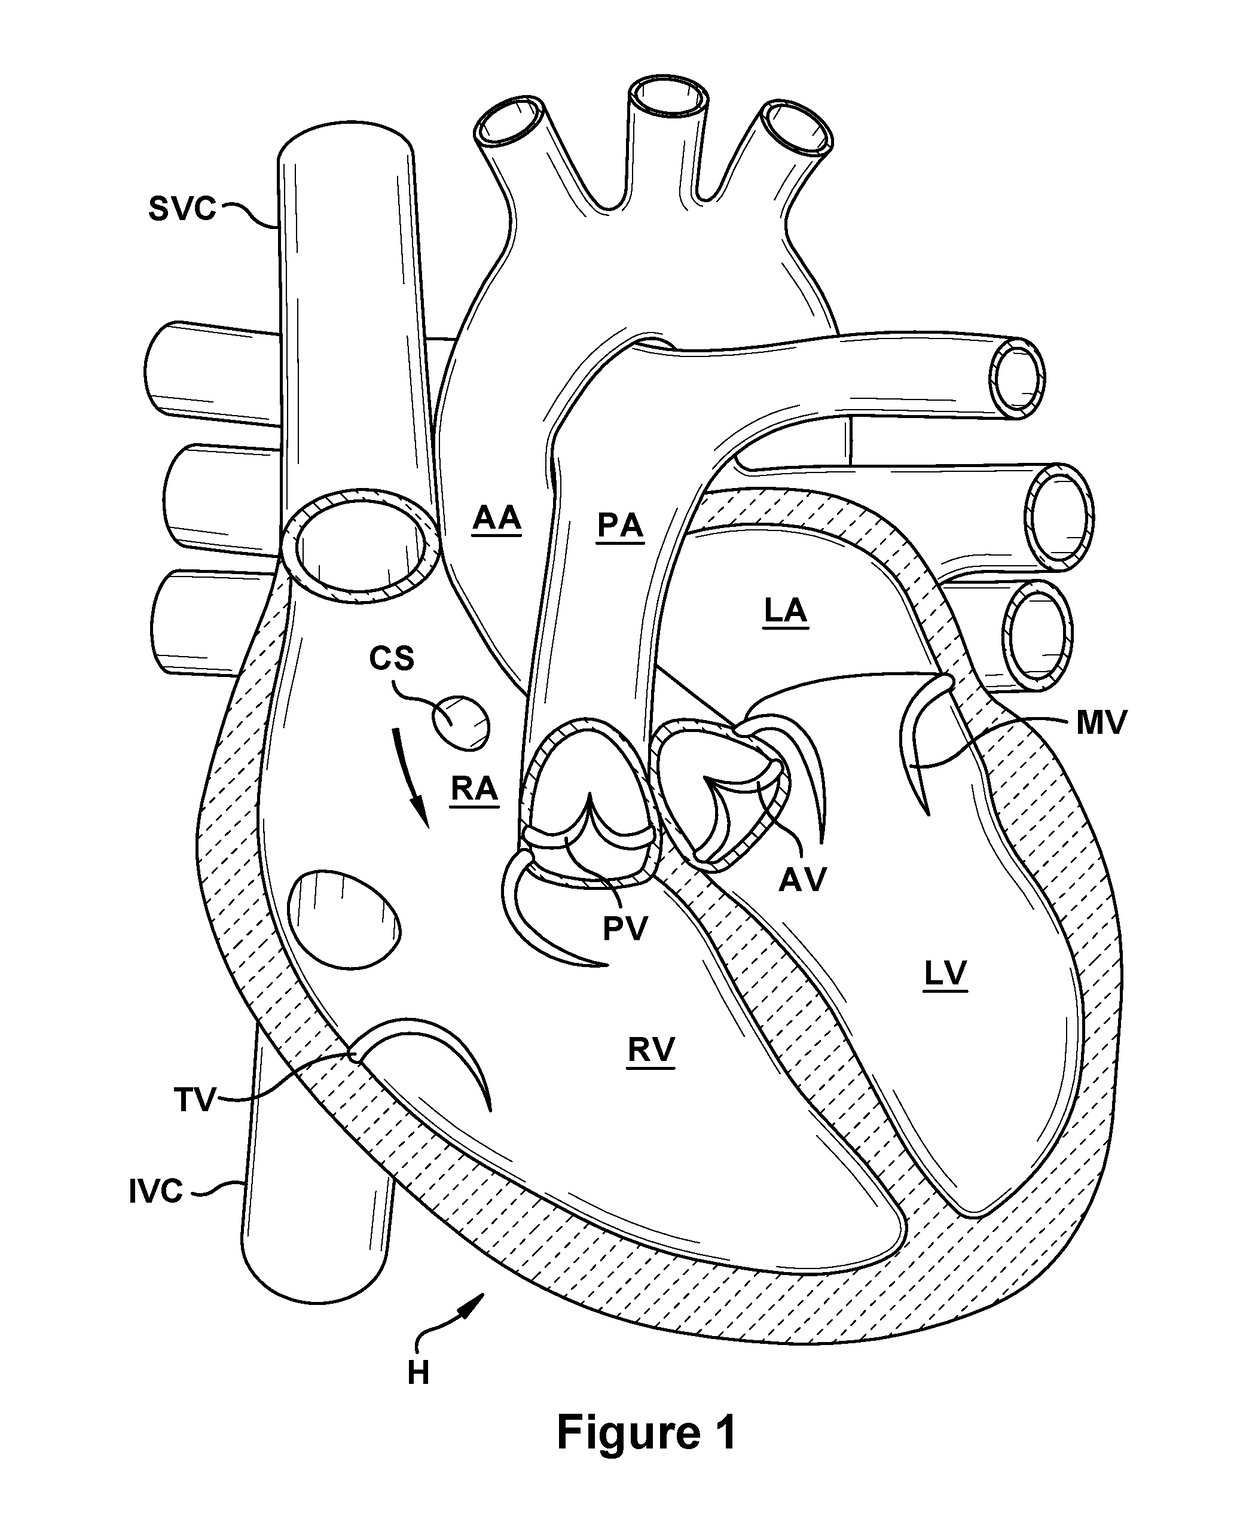 Native valve repair devices and procedures